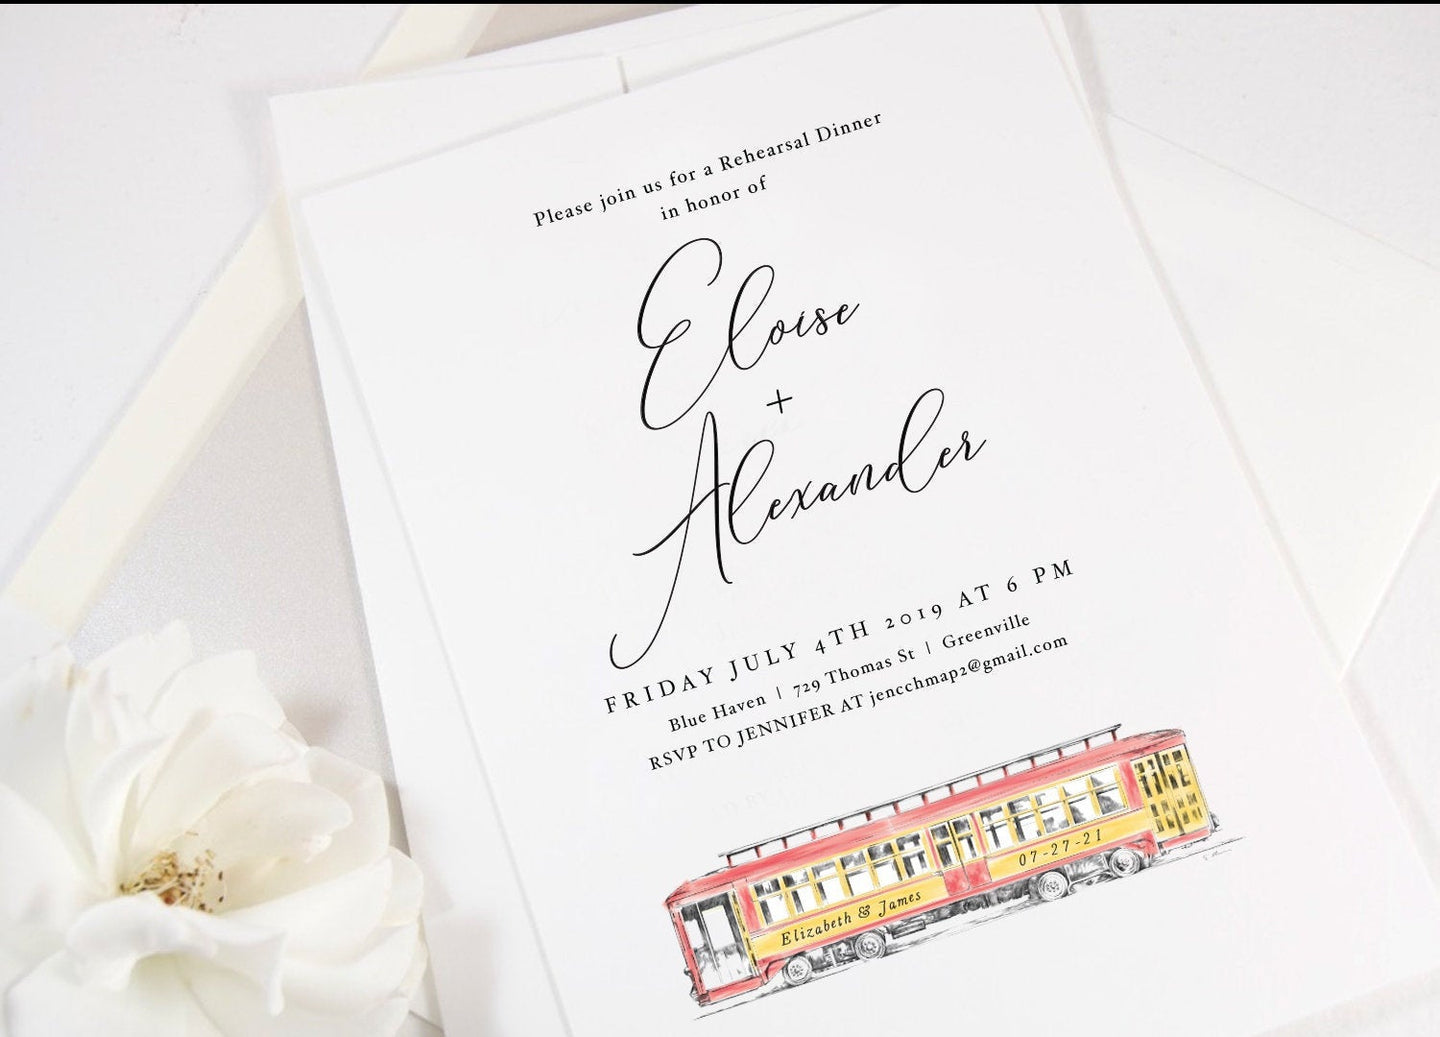 Trolley Car Rehearsal Dinner Invitations, Wedding, New Orleans Wedding, Rehearse Invite, Invitations (set of 25 cards)